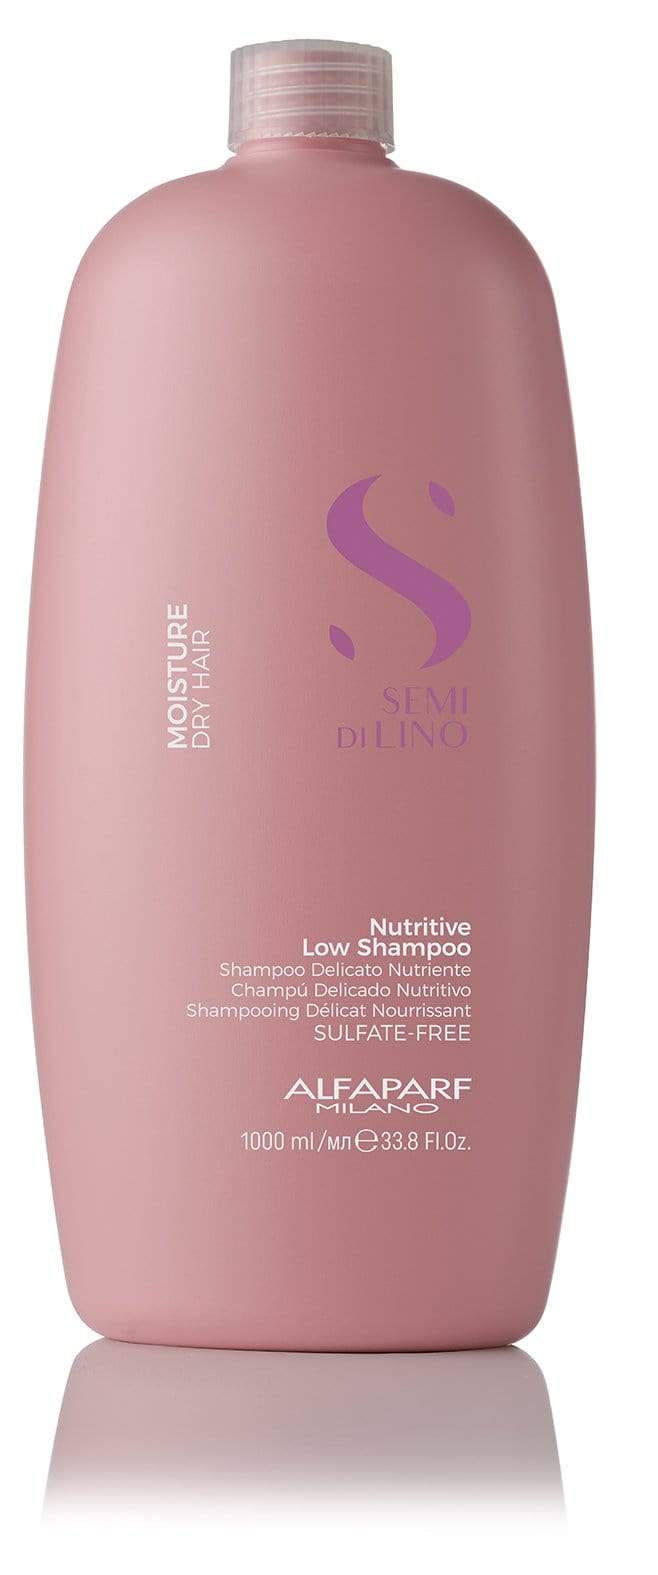 AlfaParf Semi Di Lino Moisture Nutritive Shampoo (For Dry Hair) 250ml/1liter best shampoo and conditioner for frizzy 